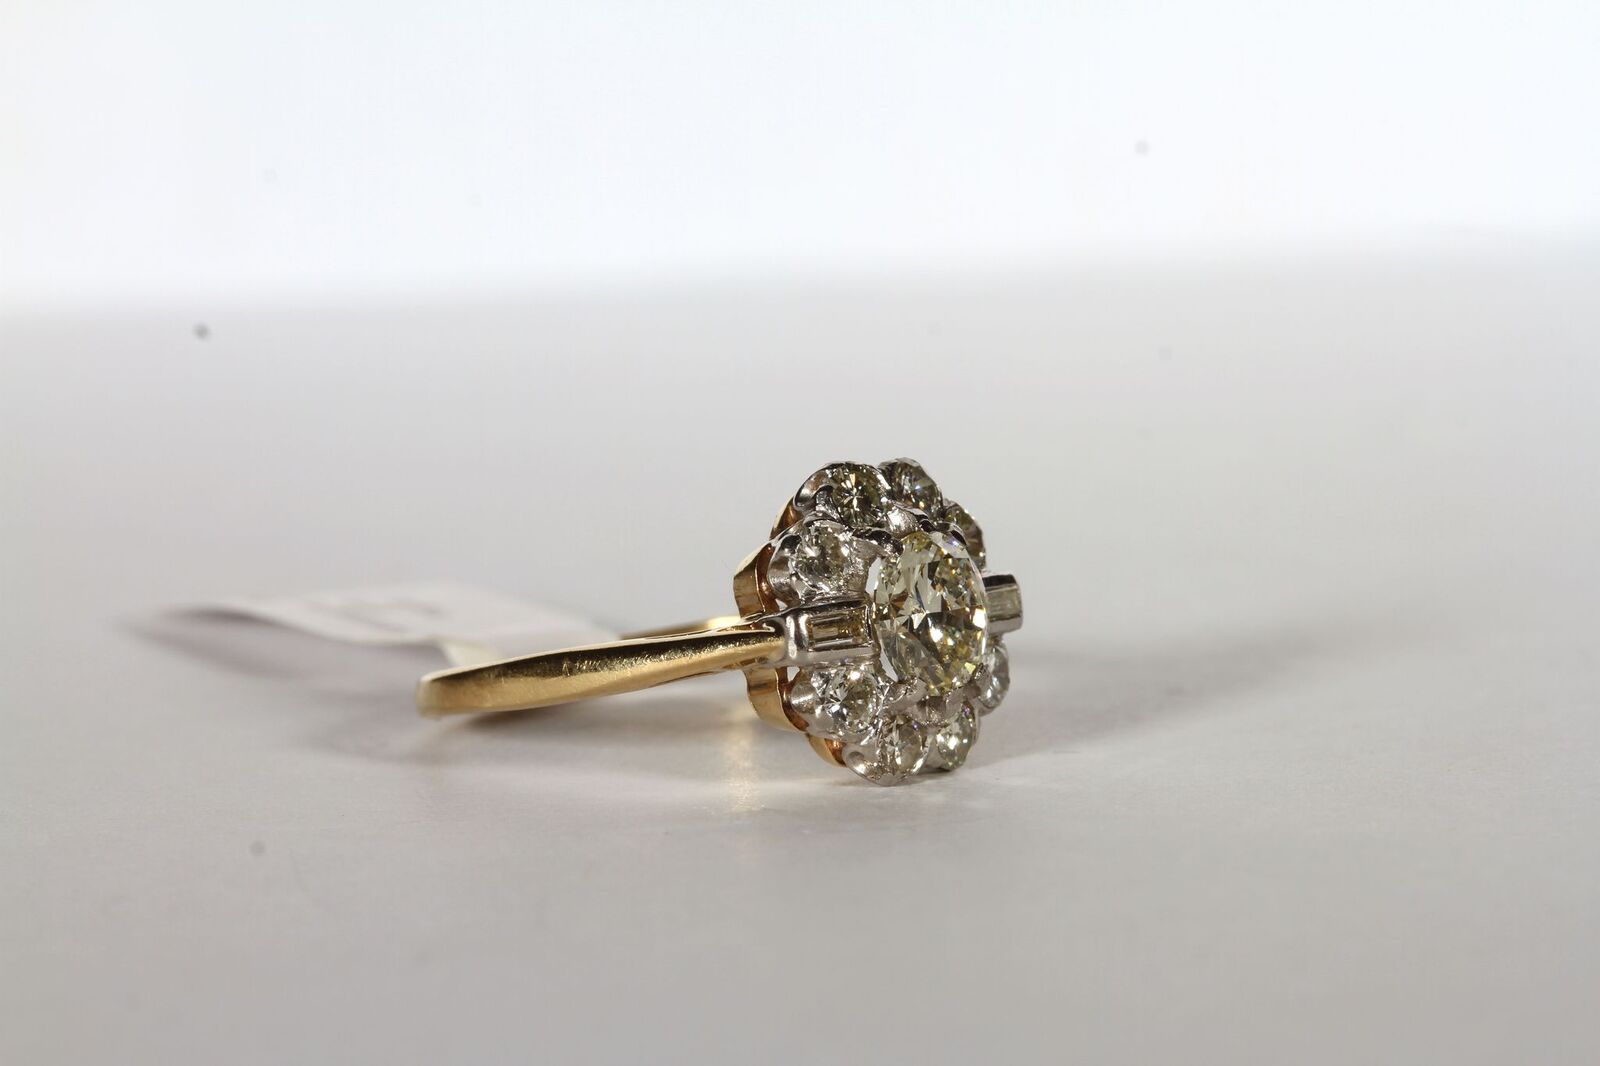 Diamond Cluster Ring, set with a central diamond approximately 0.73ct, surrounded by 2 baguette - Image 2 of 3